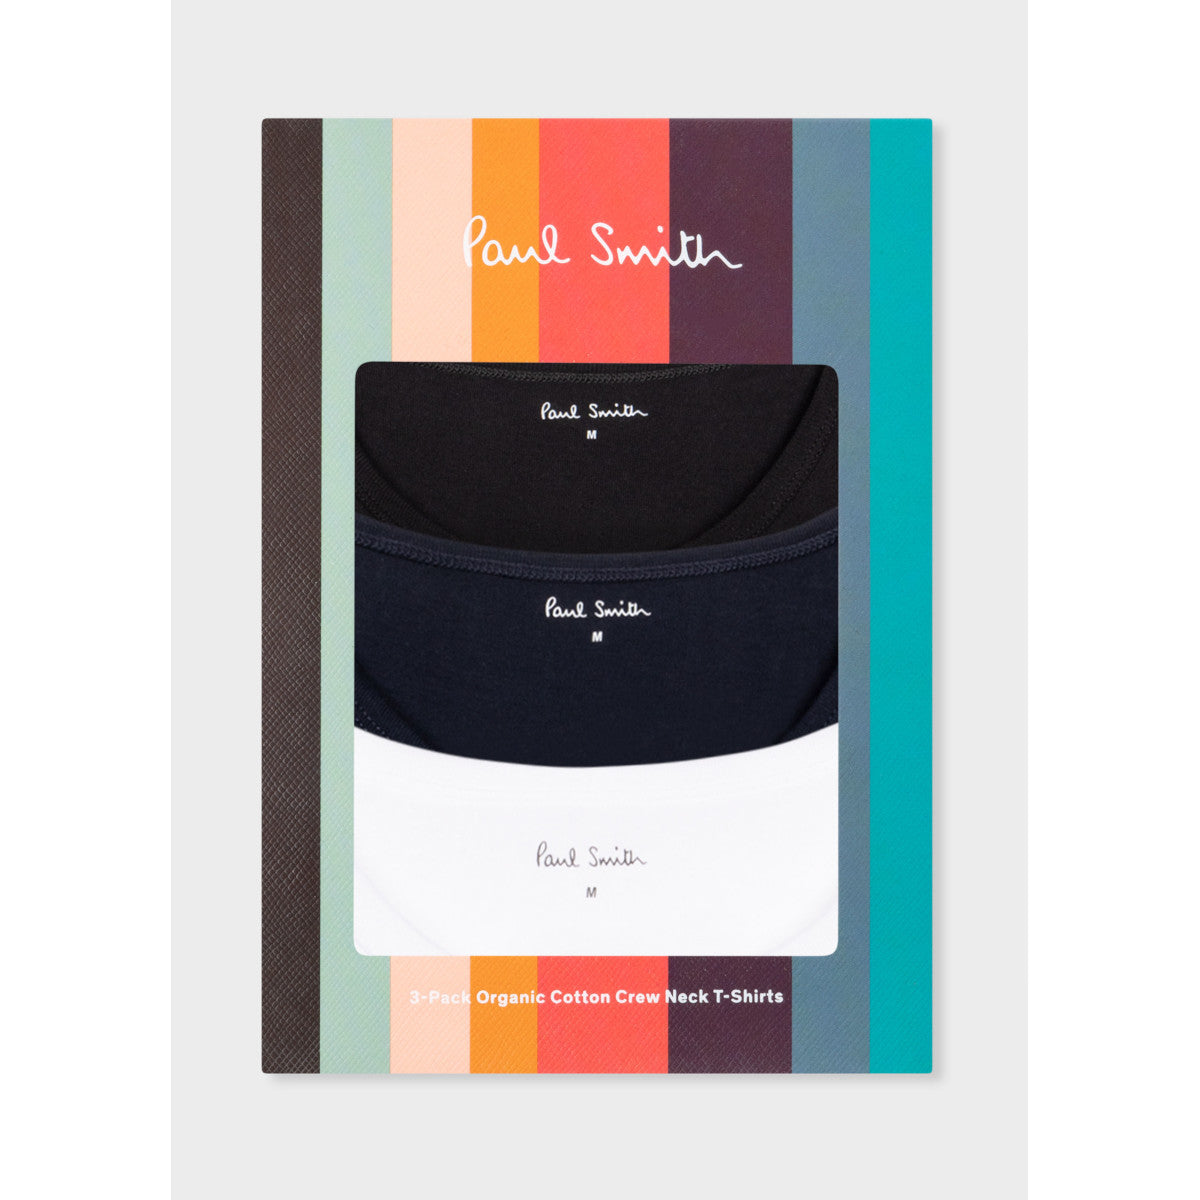 PS Paul Smith 3 Pack T-Shirt 2A Mix